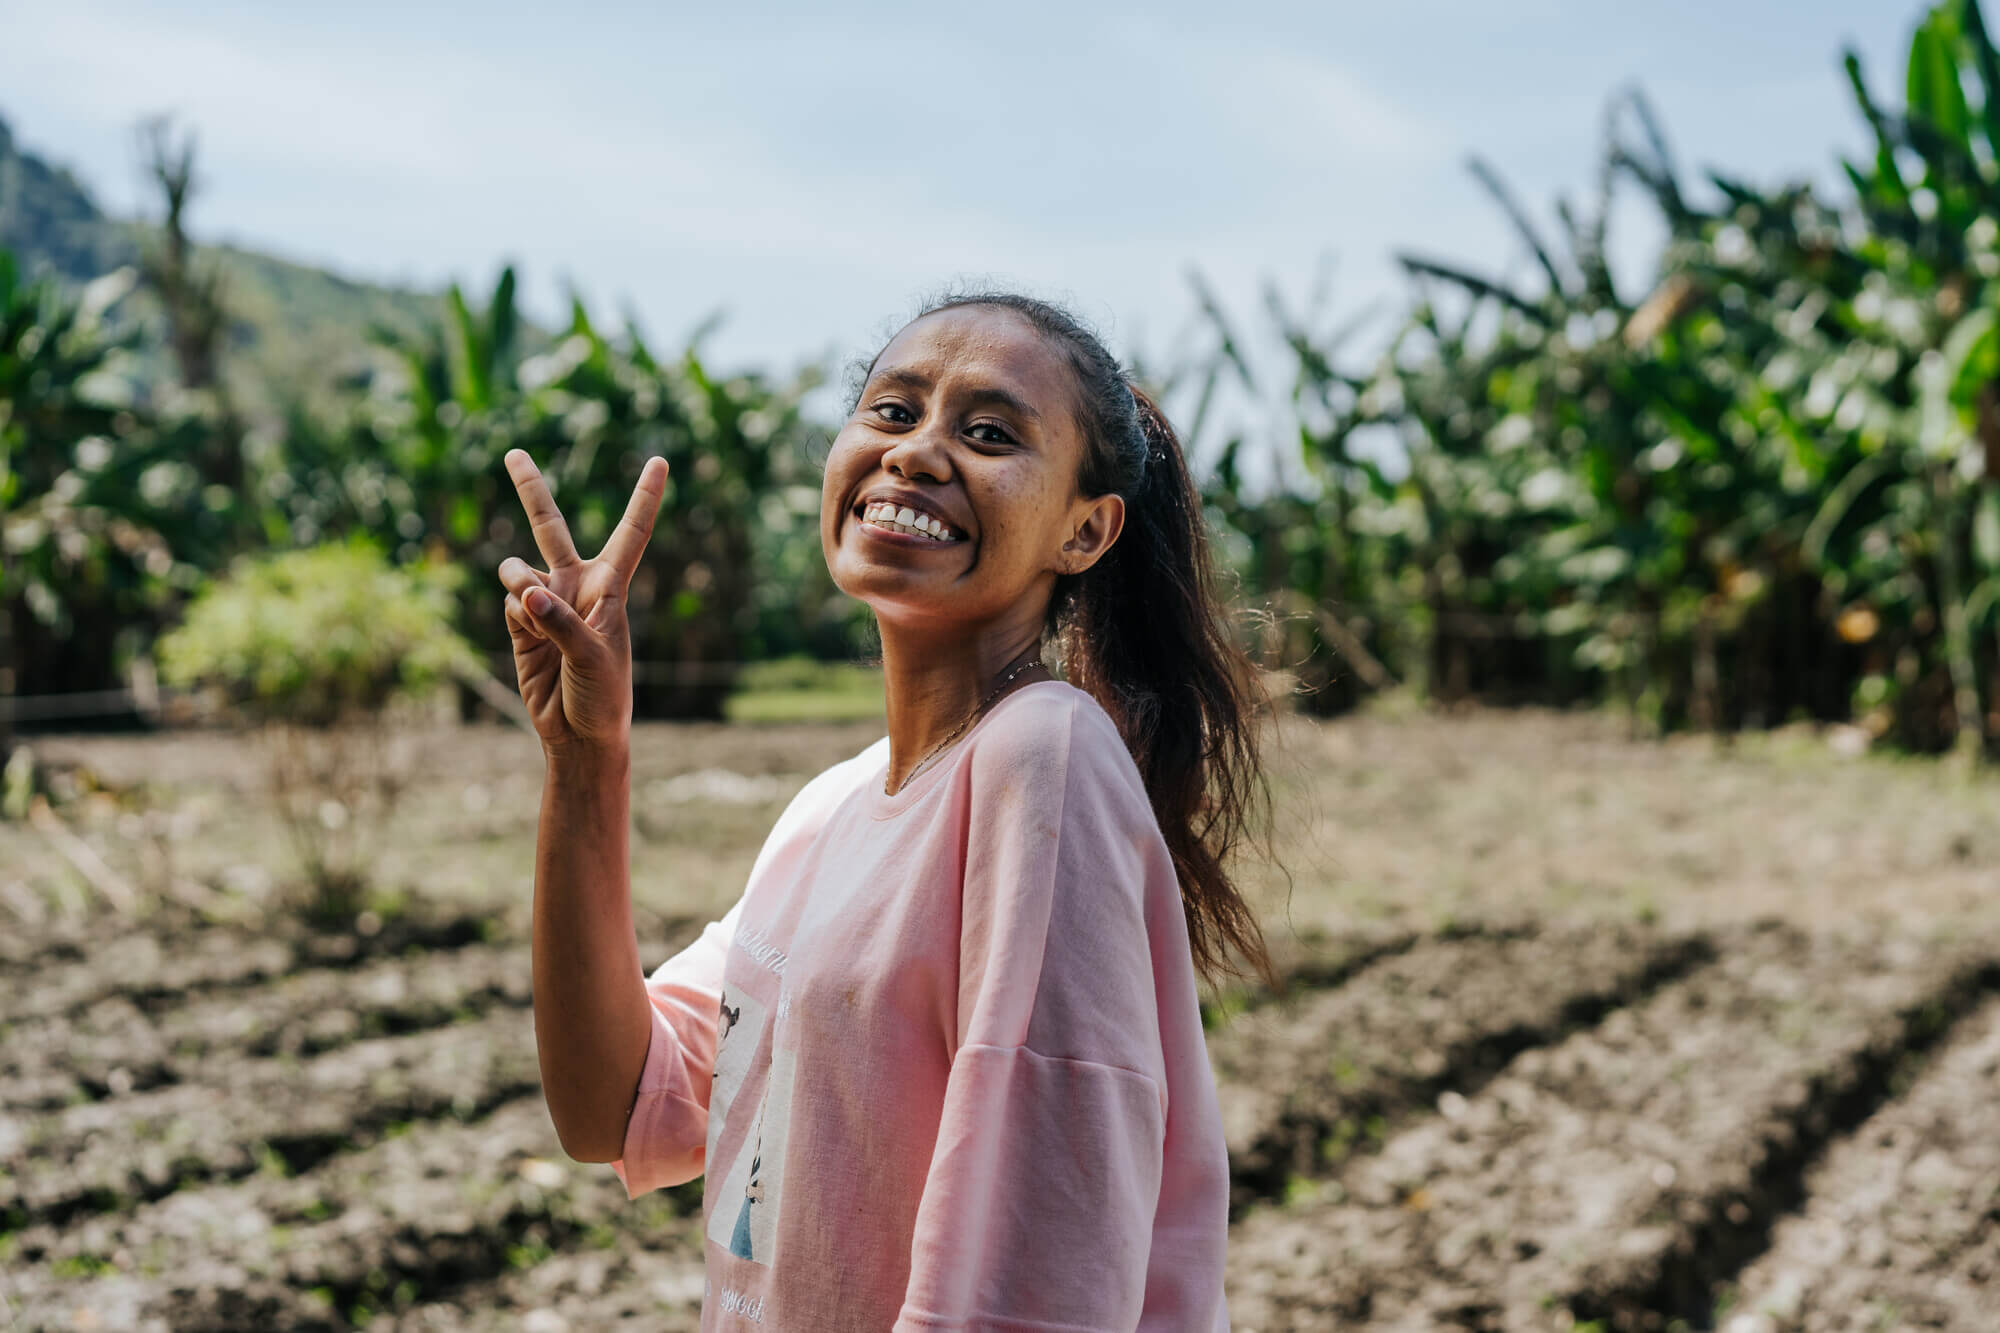 Milena smiles at the and makes a peace sign with her hands. Milena is from Youth Empowerment for Future (YEFF), who are advocating for a more diversified economy and specific budgetary support for agriculture in Timor-Leste, at their farm in Hera, outside Dili.